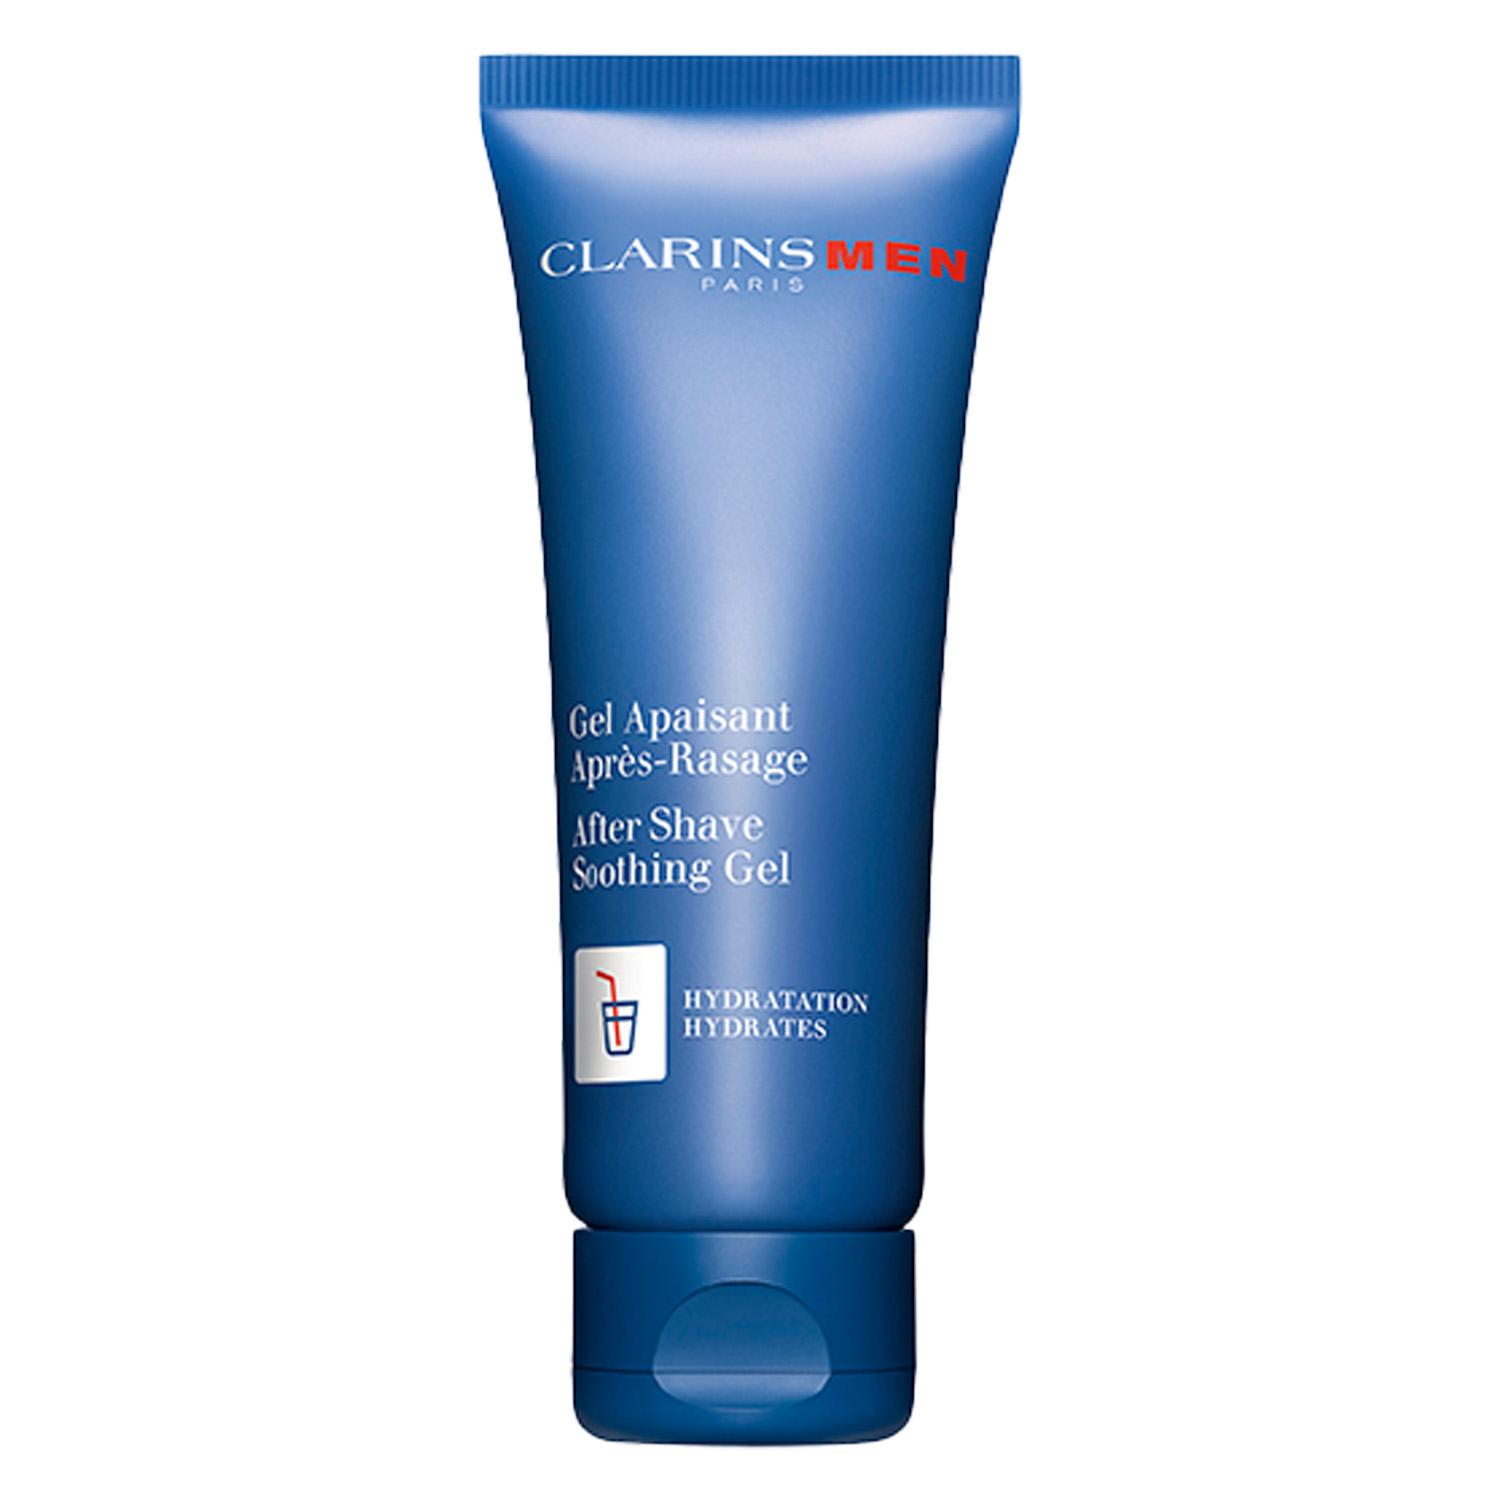 Clarins Men - After Shave Soothing Gel